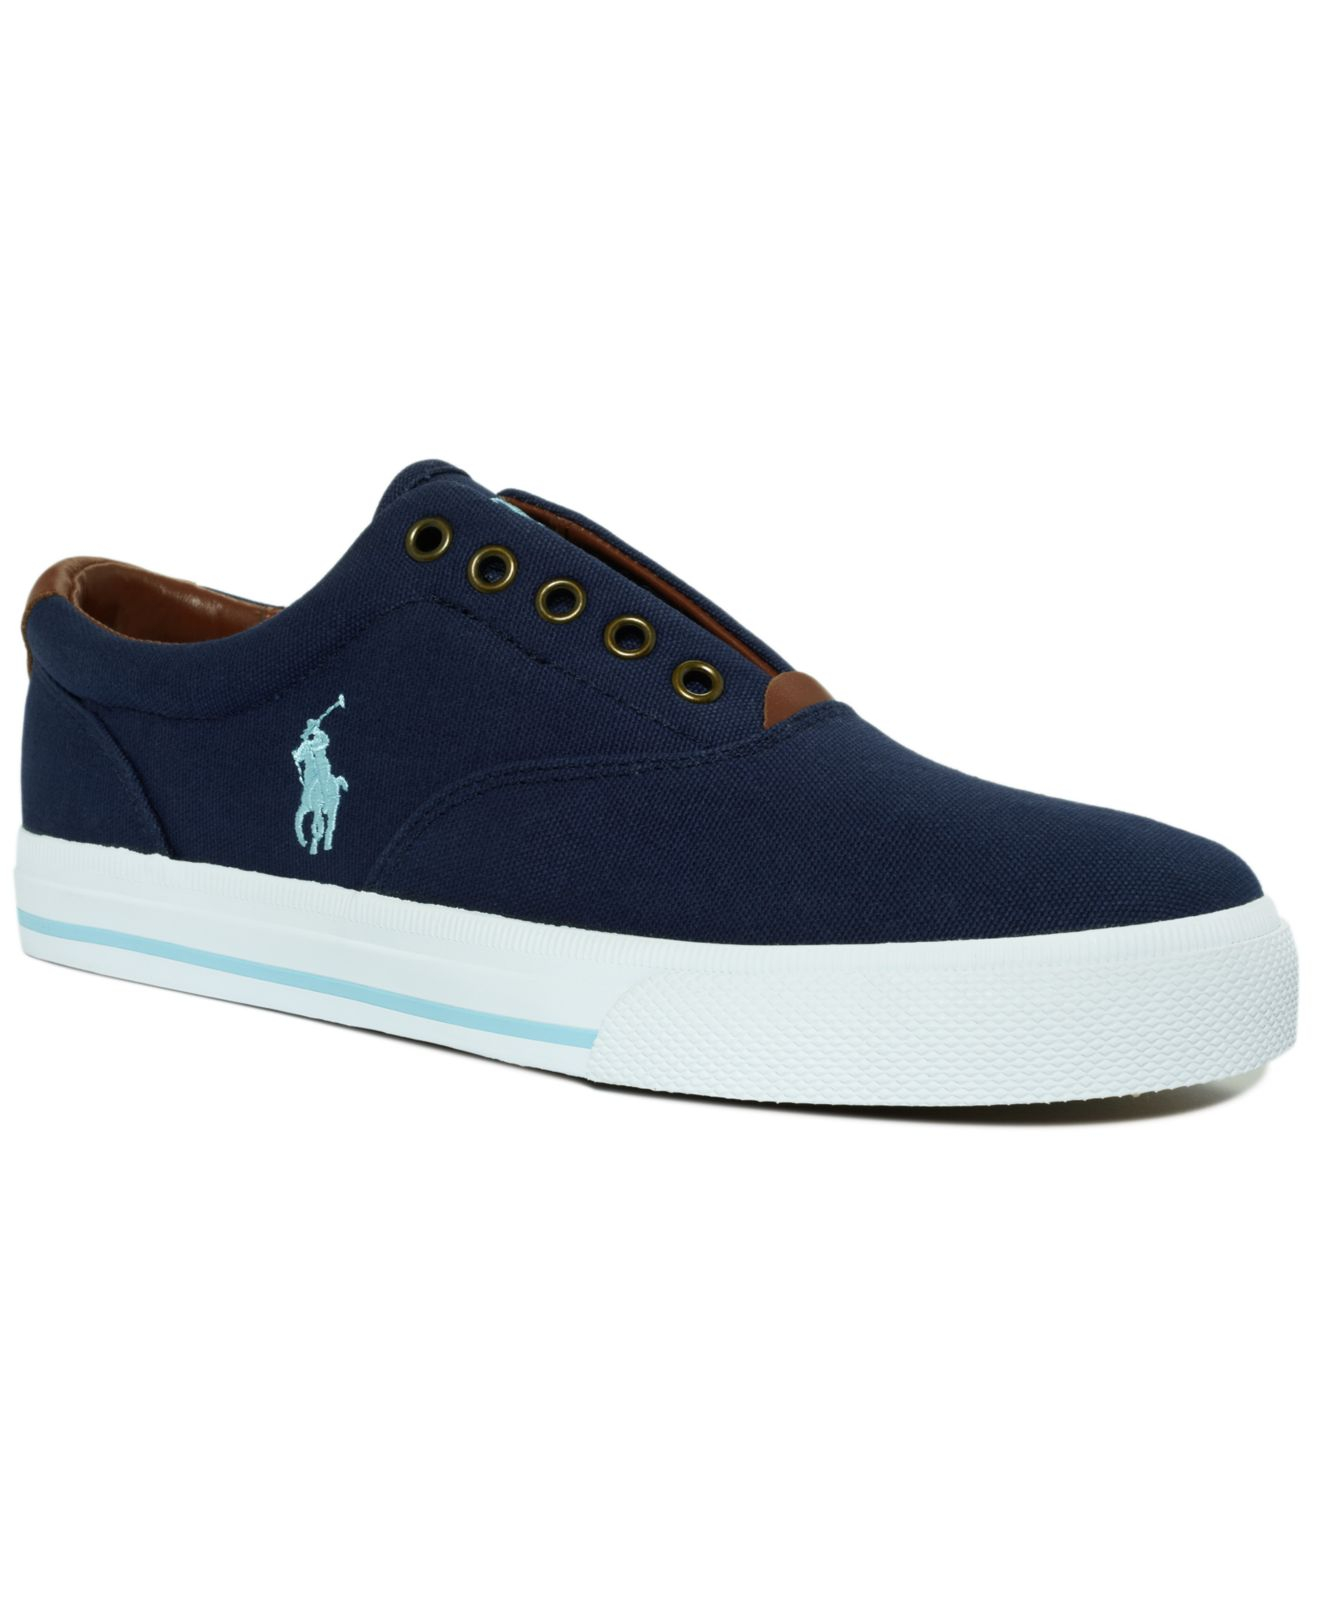 Lyst - Polo Ralph Lauren Vito Laceless Canvas Sneakers in Blue for Men